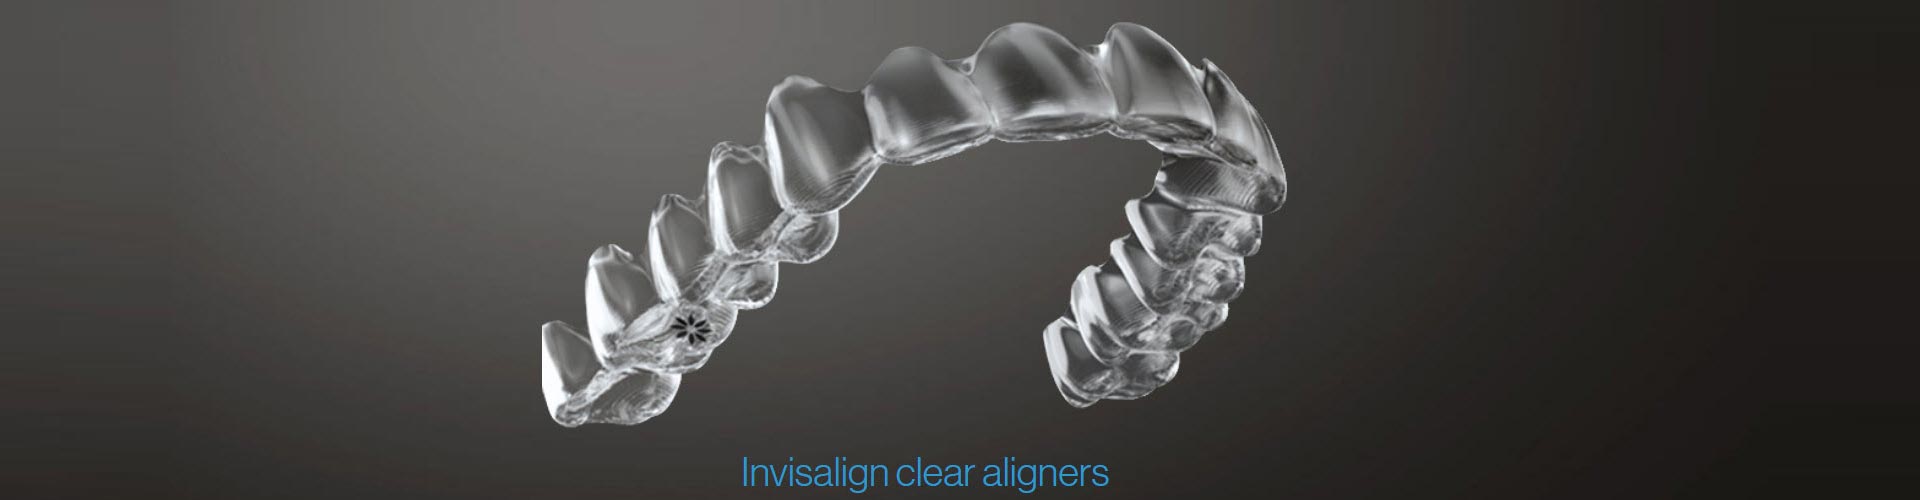 Invisalign Clear Aligns for Kids, Teens and Adults